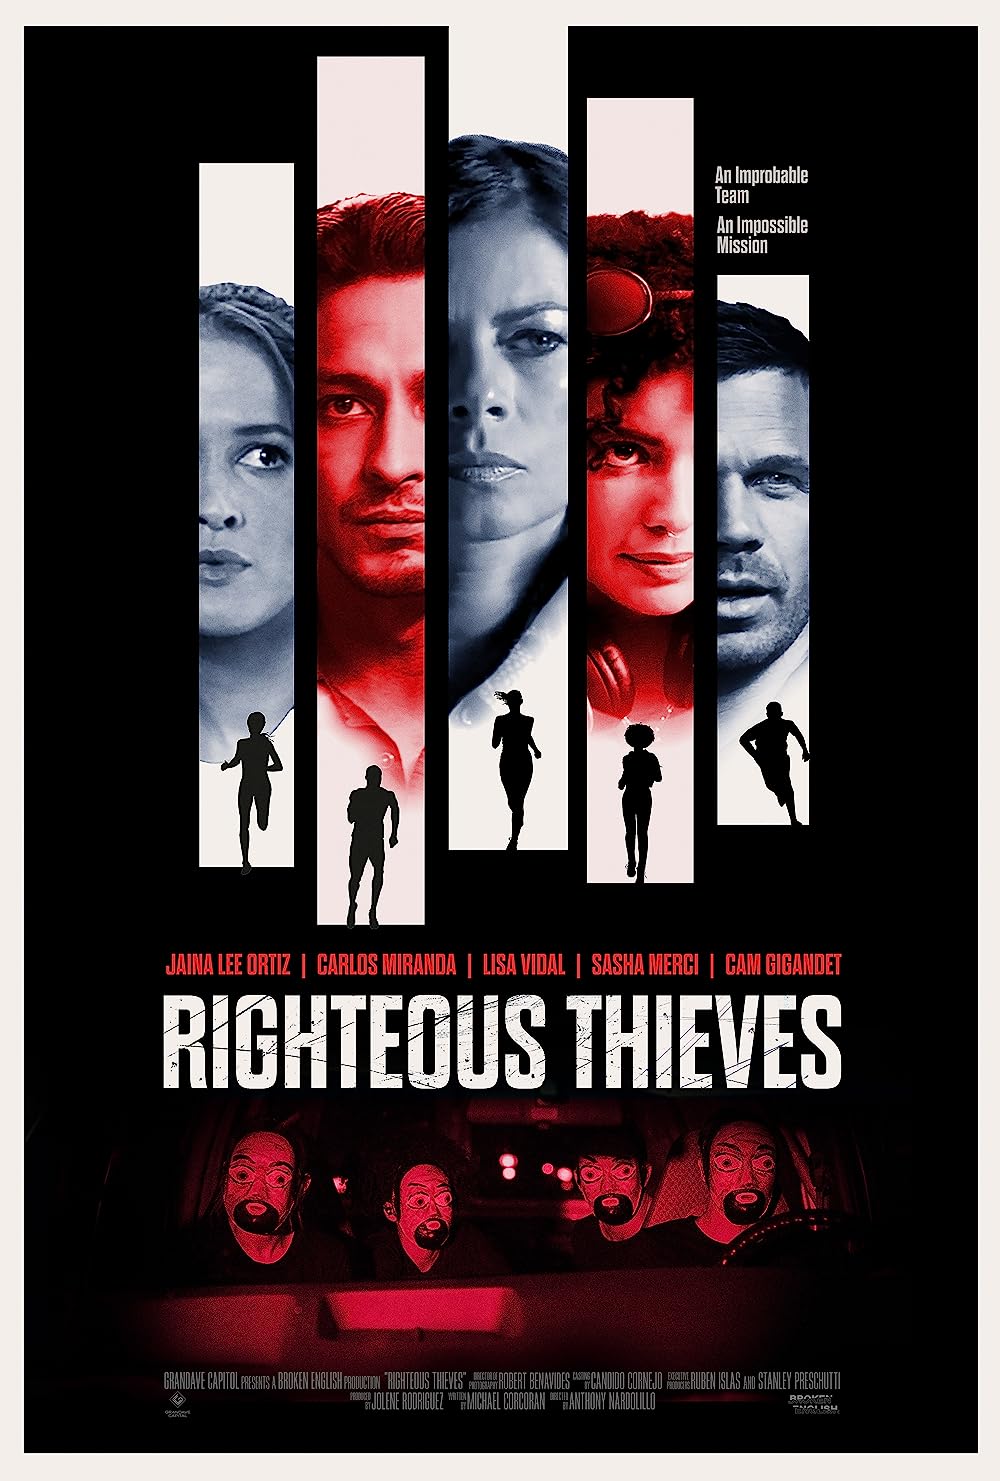 Official movie poster for Righteous Thieves